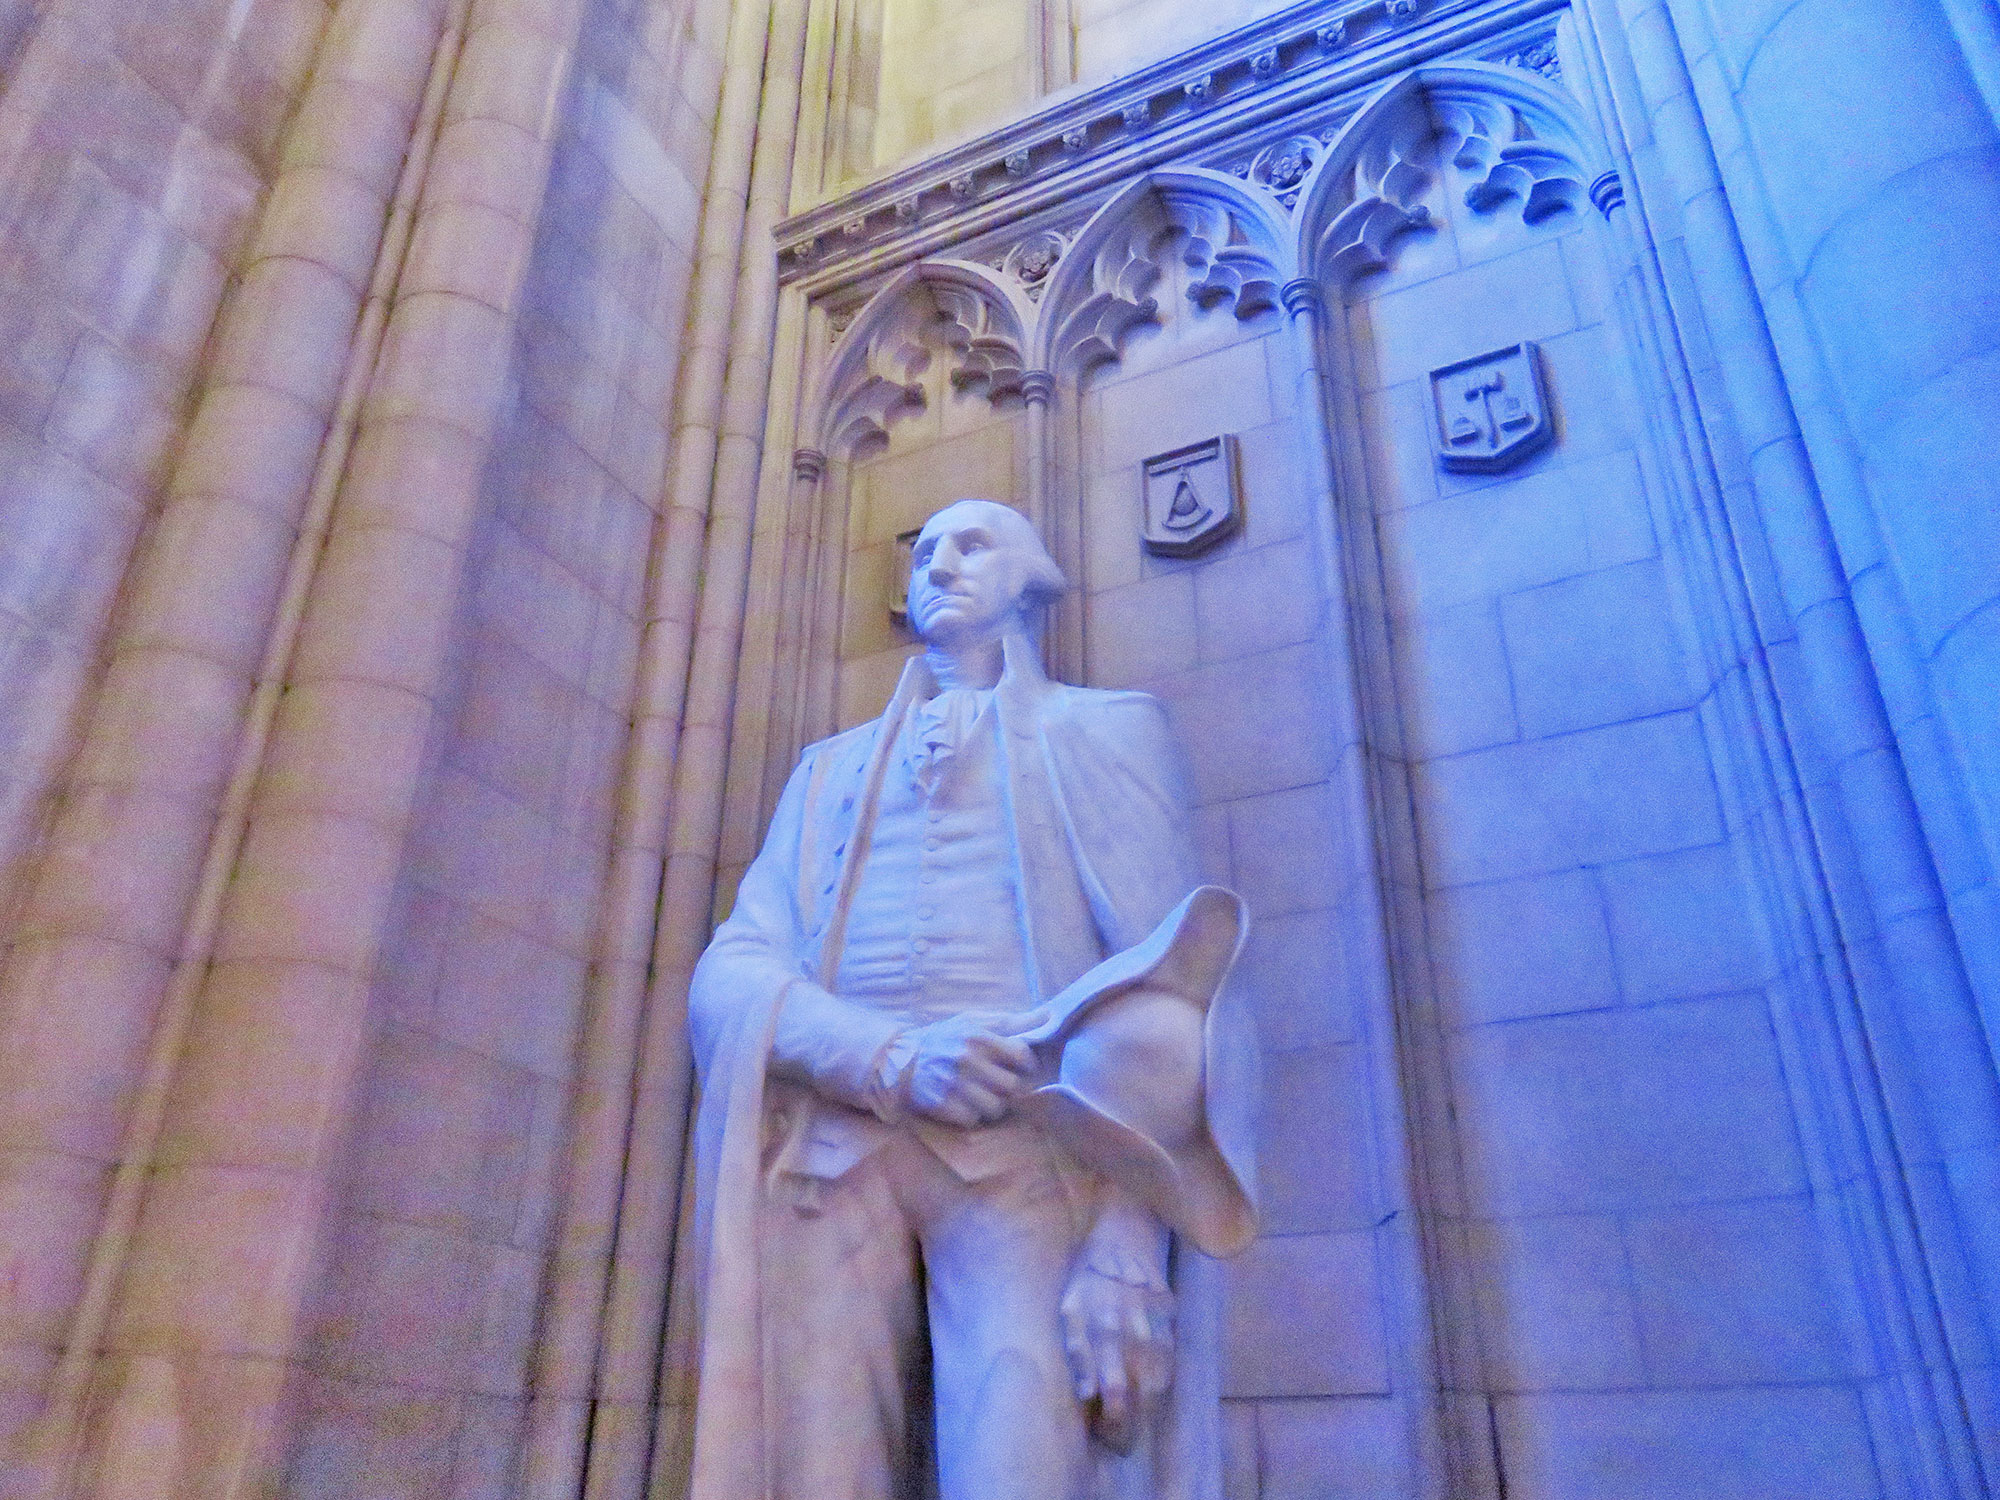 A statue of George Washington at the Washington National Cathedral.